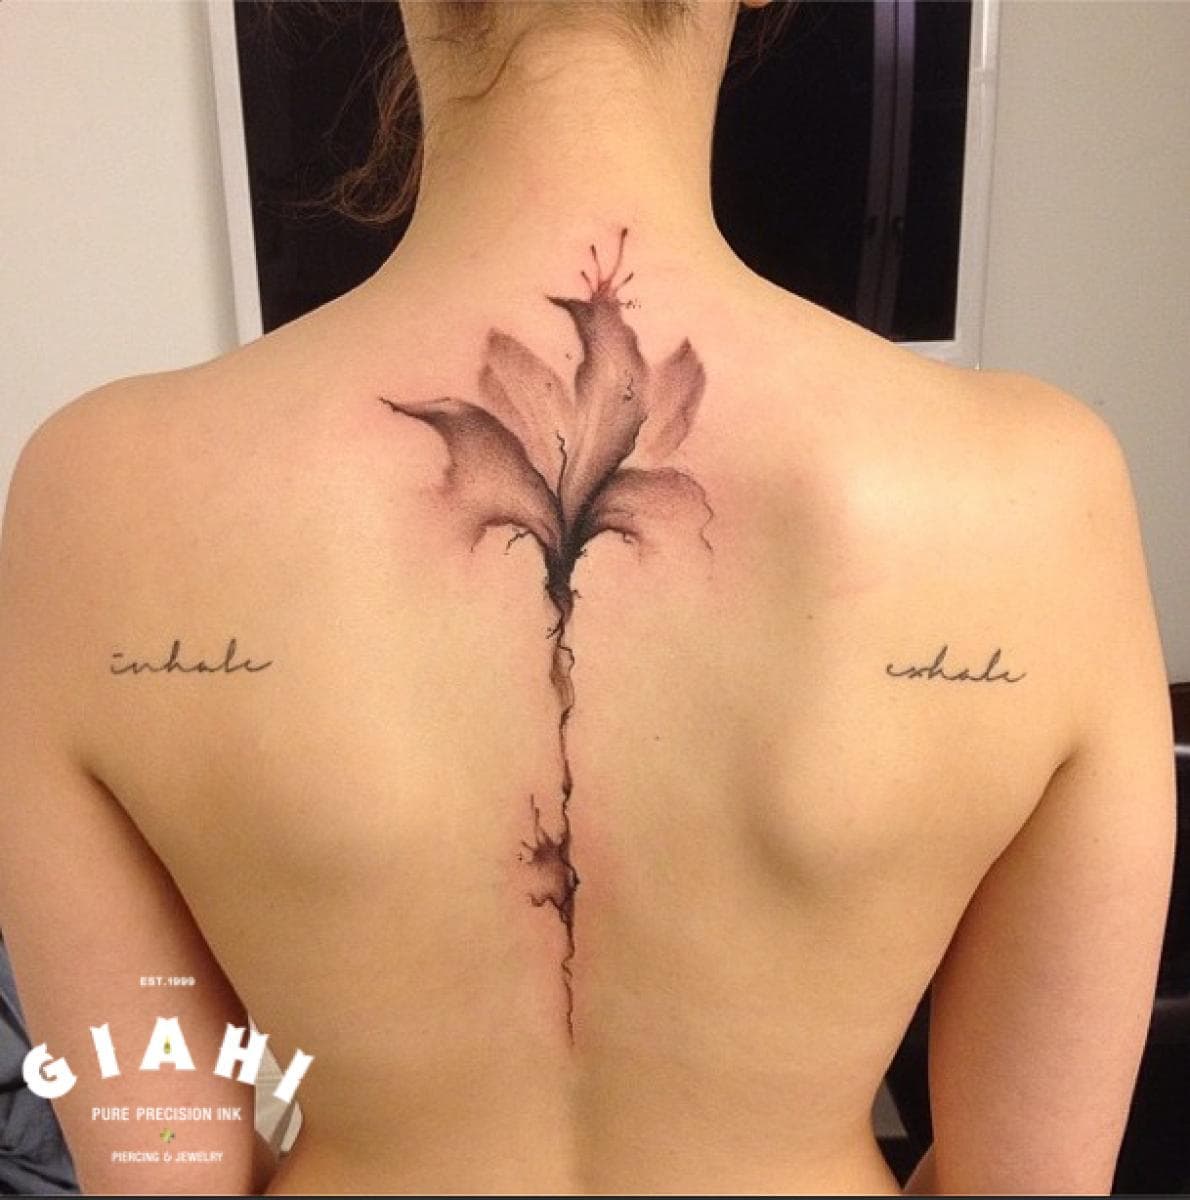 Random Ideas to Get a Tattoo Right Up Your Spine